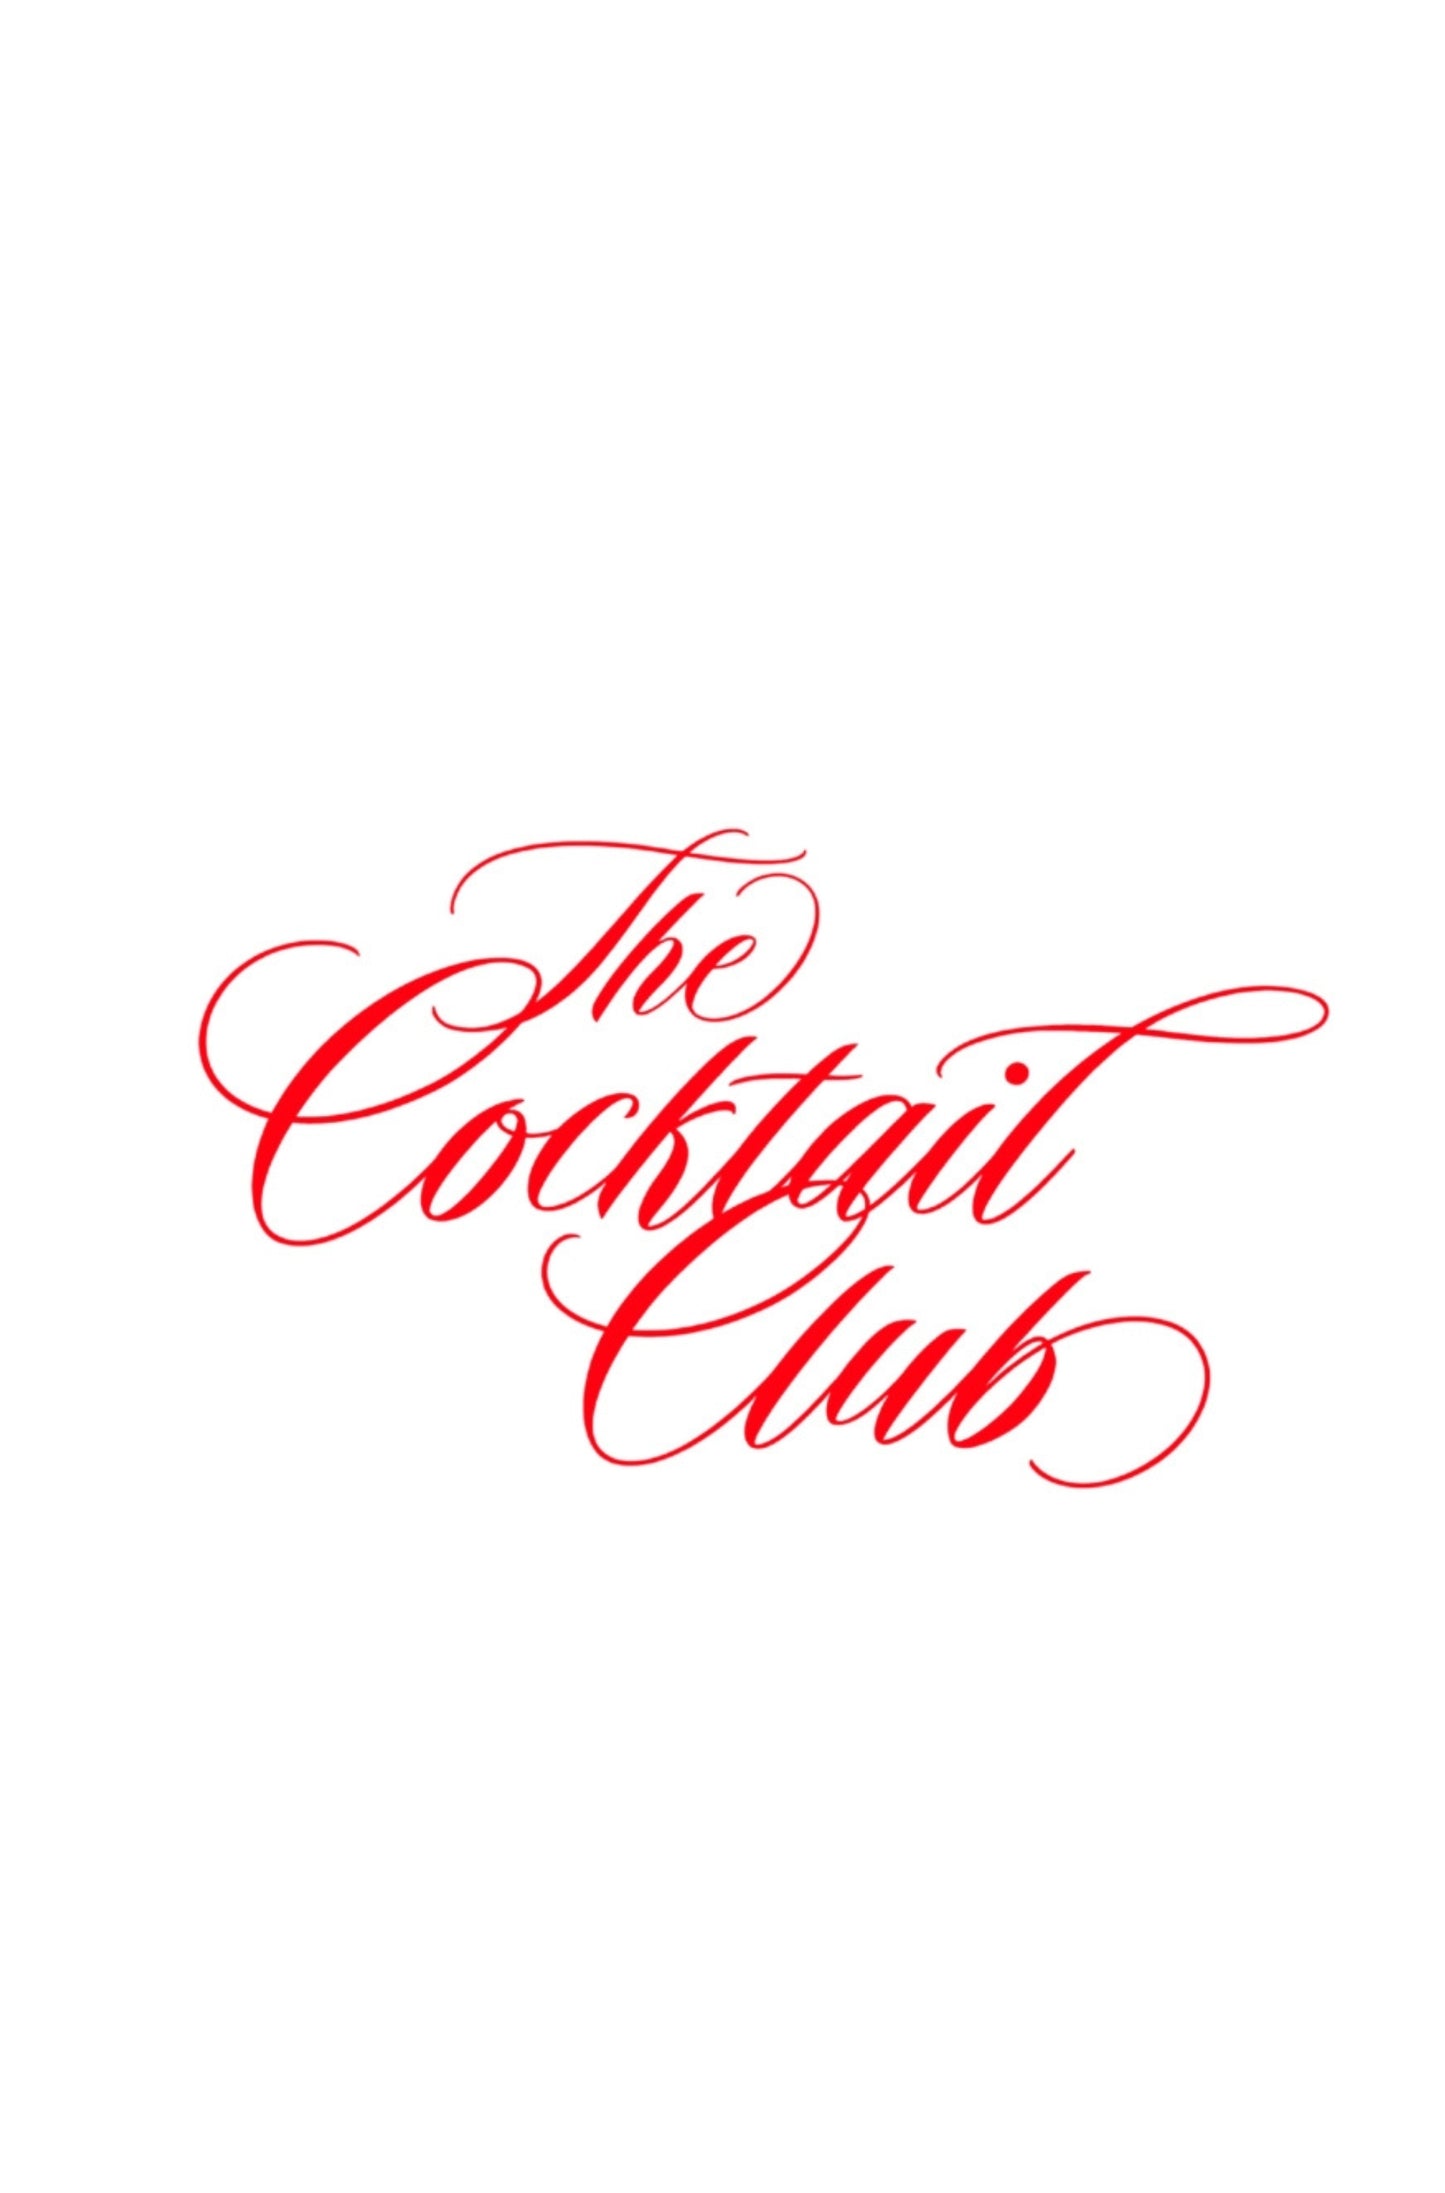 the cocktail club.